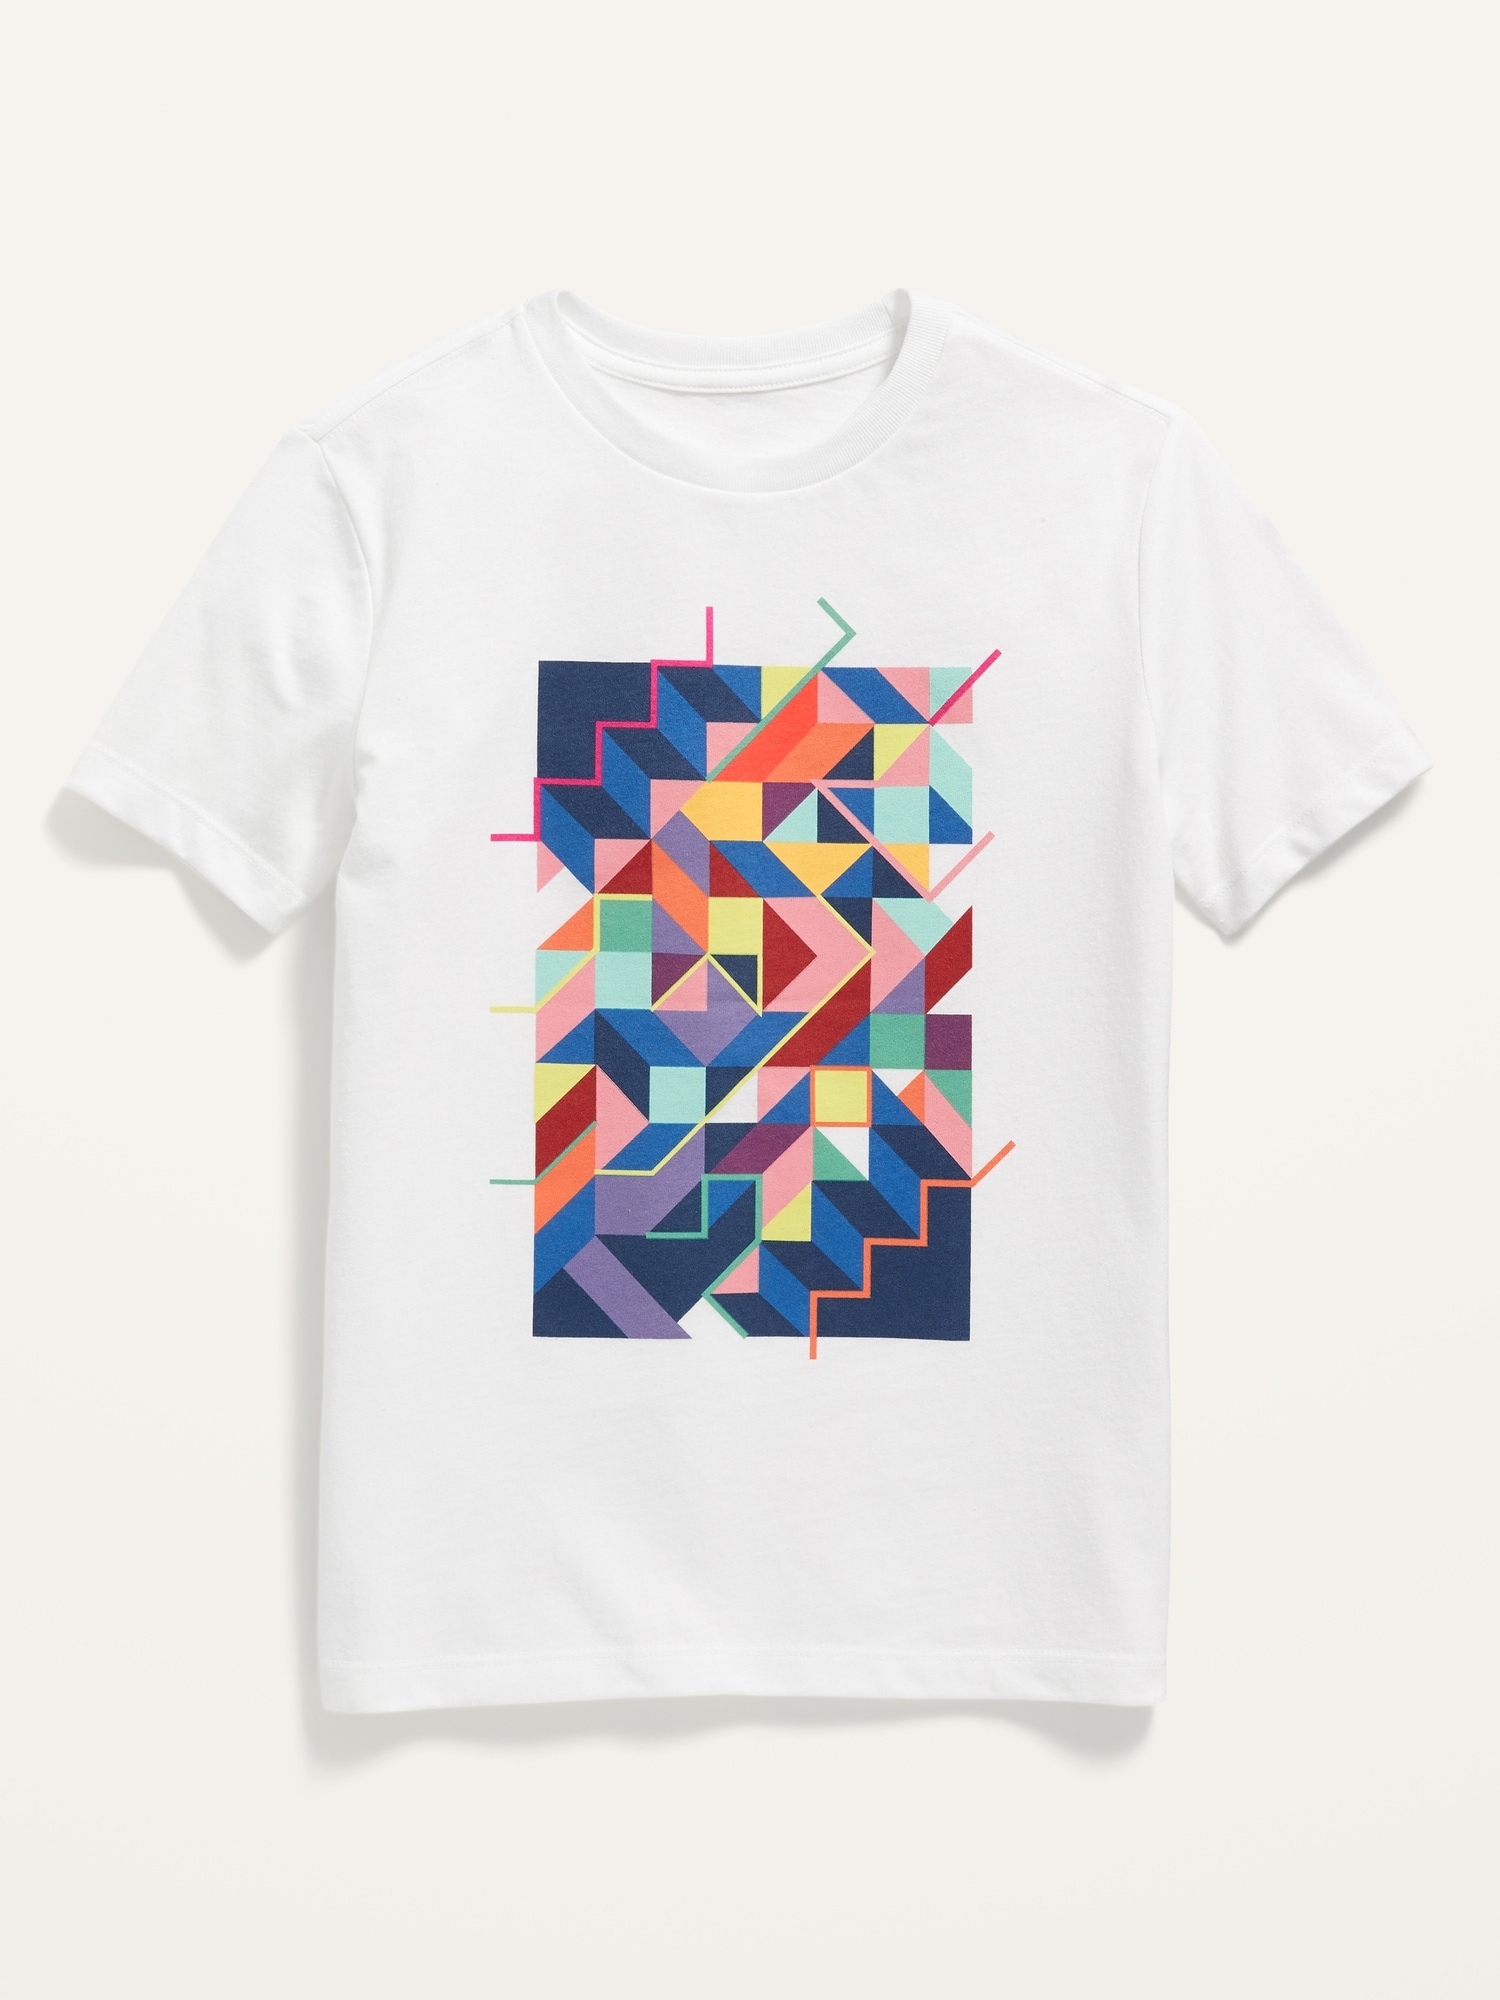 Matching Pride Graphic Tee for Kids